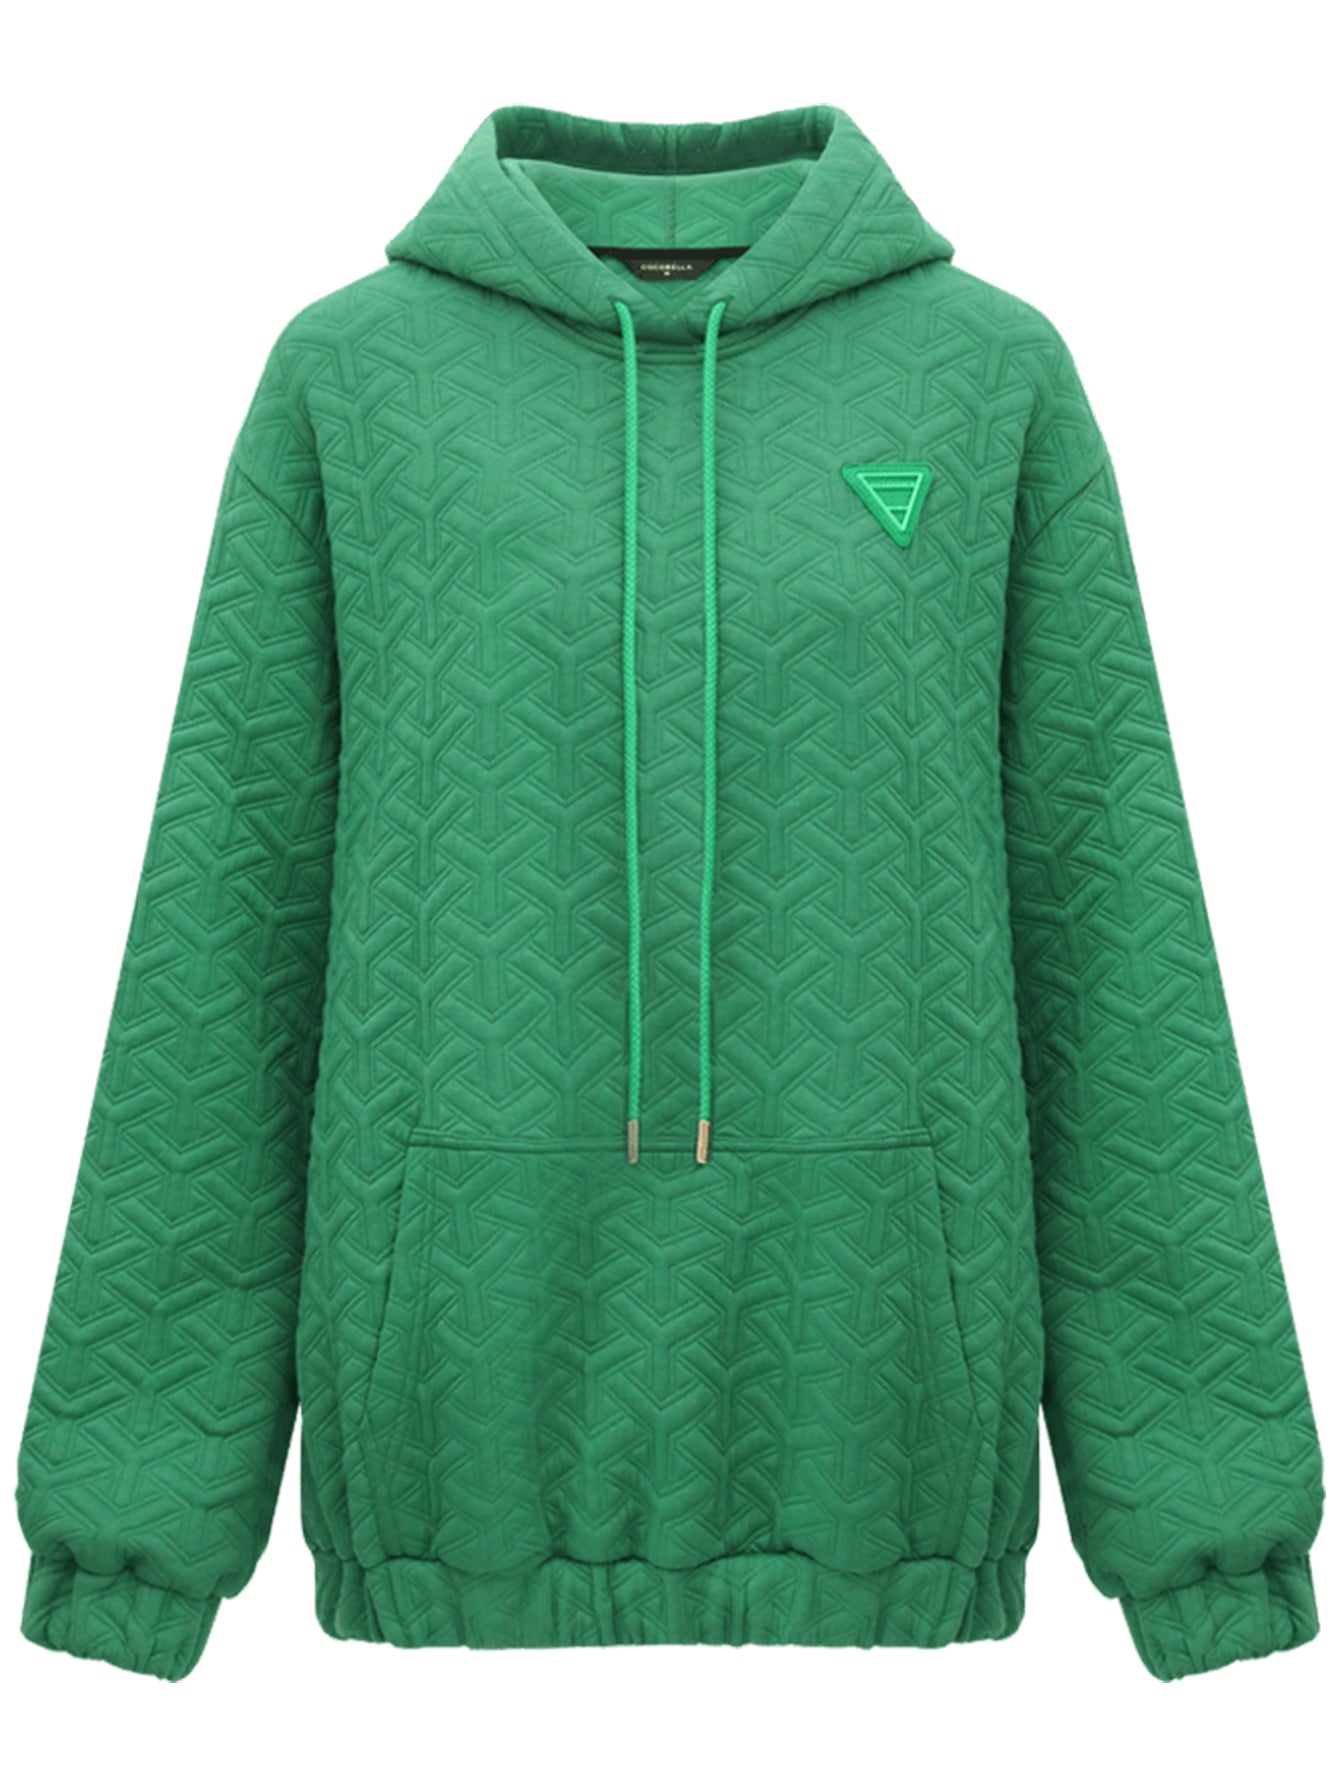 green-quilted-hoodie_all_green_4.jpg